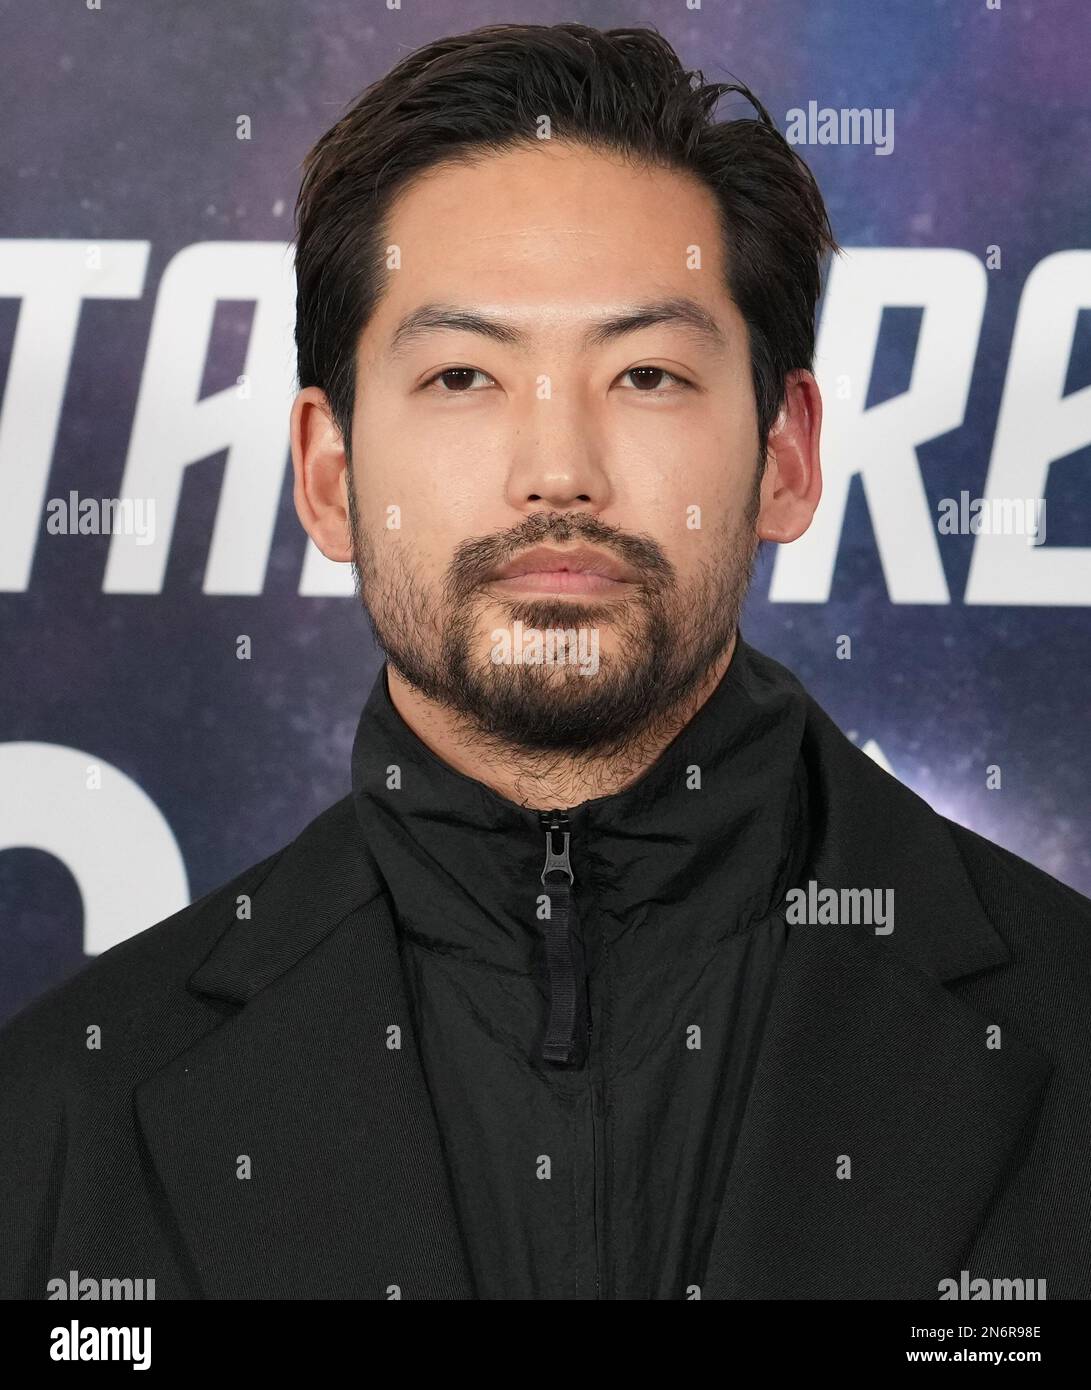 Joseph Lee arrives at the Paramount+ Original Series' STAR TREK: PICARD Final Season Premiere held at the TCL Chinese Theatre in Hollywood, CA on Thursday,February 9, 2023. (Photo By Sthanlee B. Mirador/Sipa USA) Stock Photo